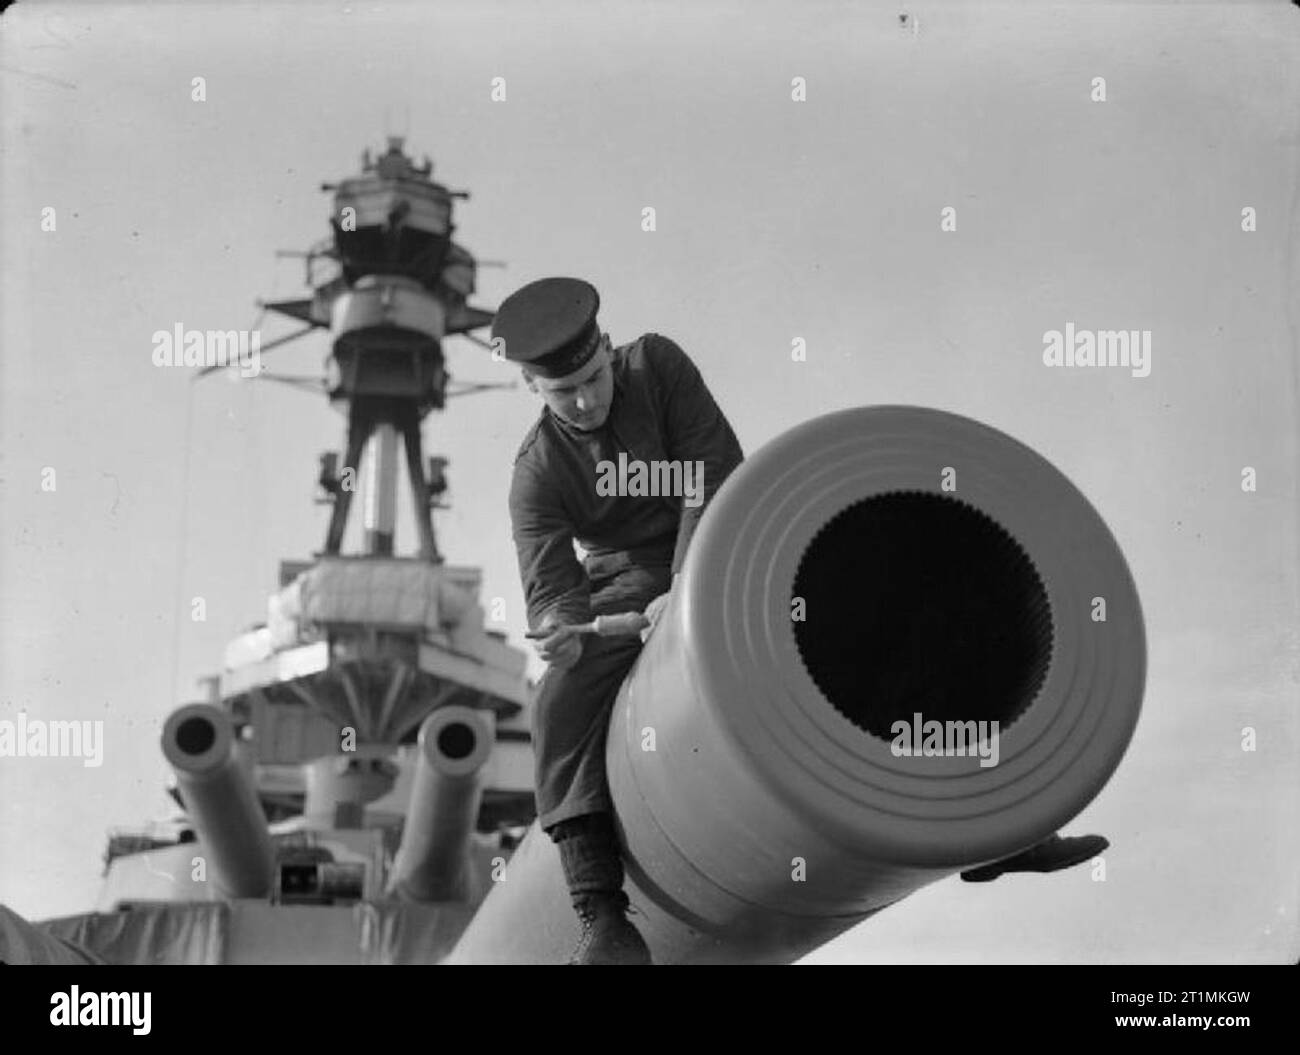 The Royal Navy during the Second World War A naval rating sits astride the barrel of a 15 inch Mark I gun aboard the battleship HMS REVENGE. He is painting the barrel. The polygroove rifling can cleary be seen inside the barrel of the gun. Stock Photo